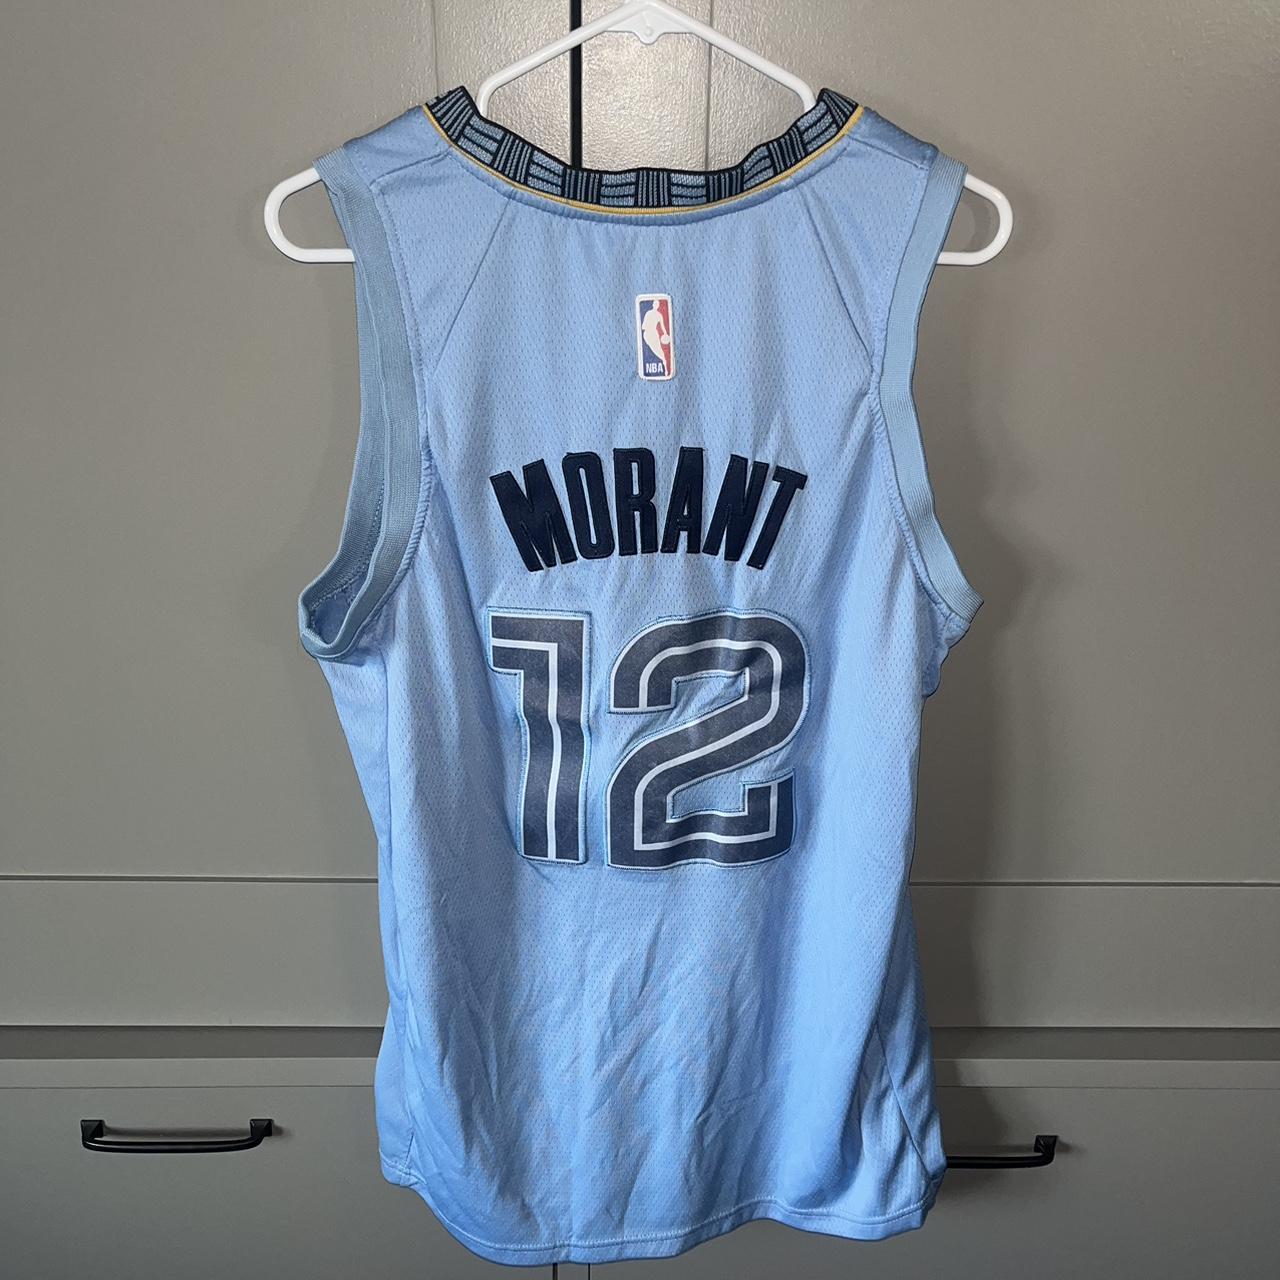 Best Selling Product] Memphis Grizzlies Ja Morant 12 White Teal Jersey  Inspired Amazing Outfit Hoodie Dress